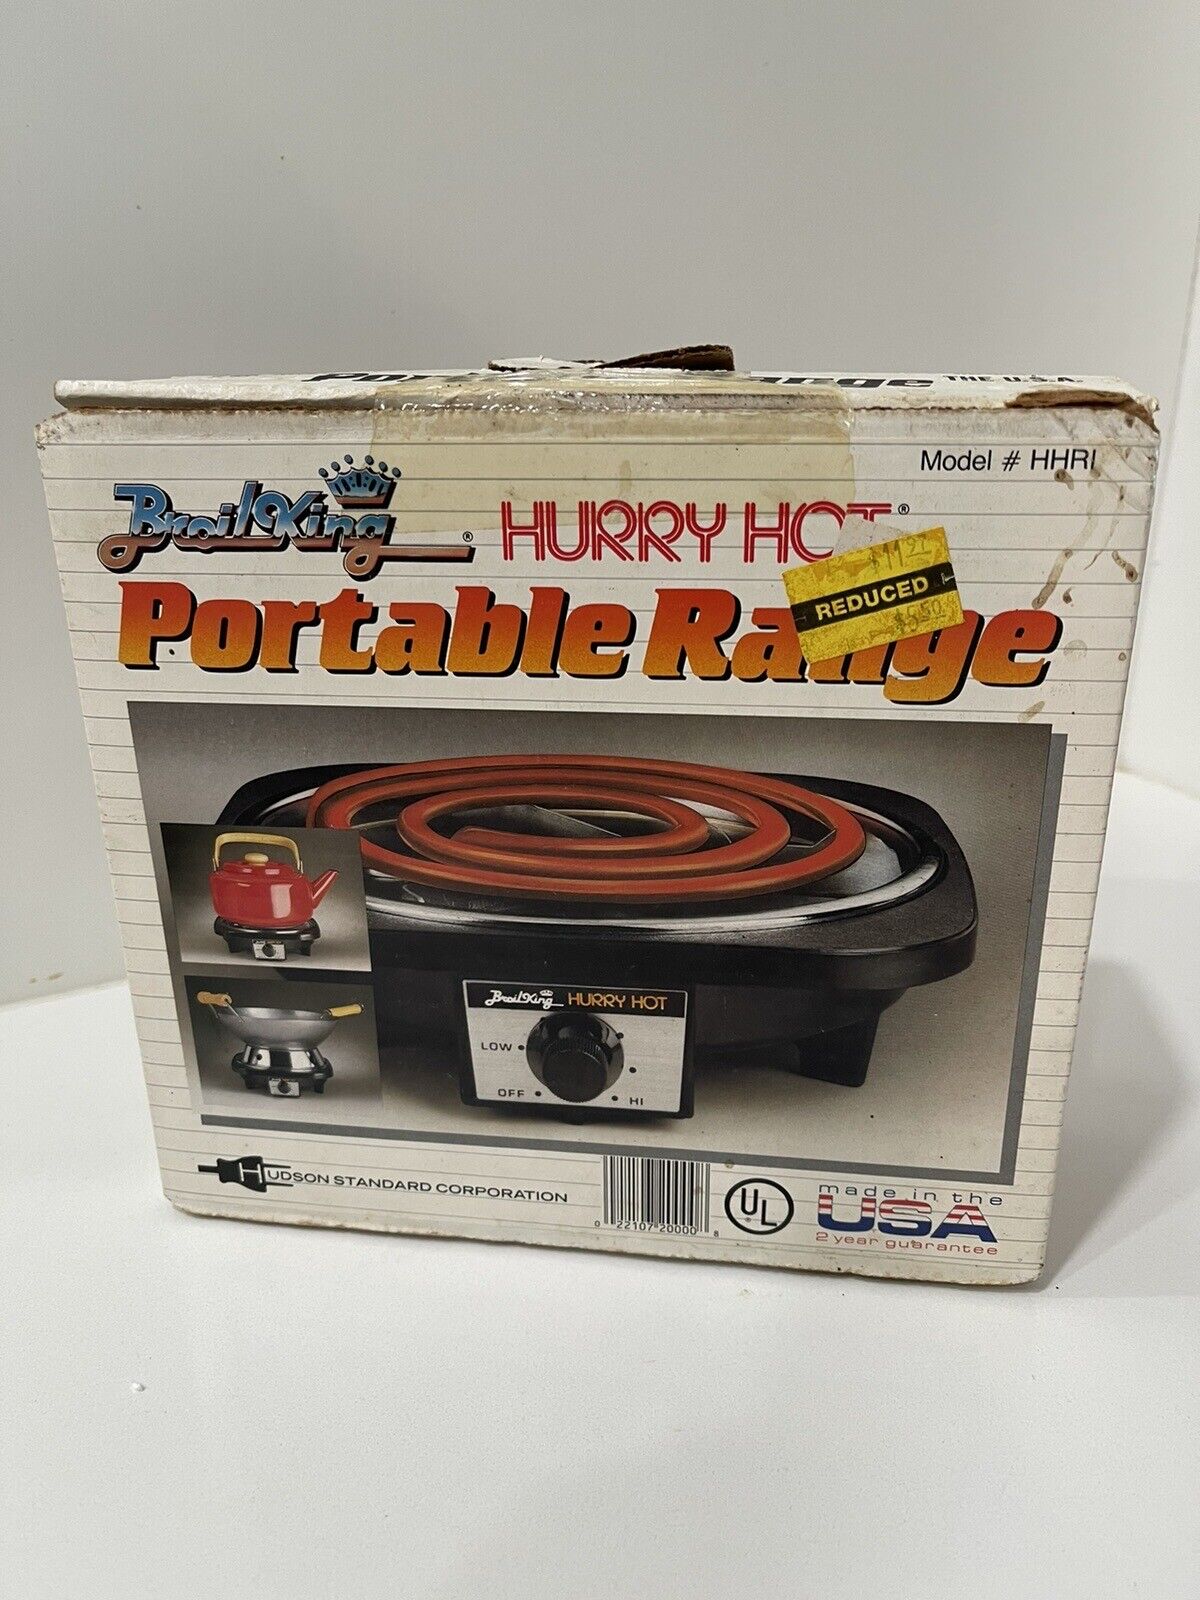 Broil King Hurry Hot Portable Range Hot Plate. Model HHRI. Made In USA NOS